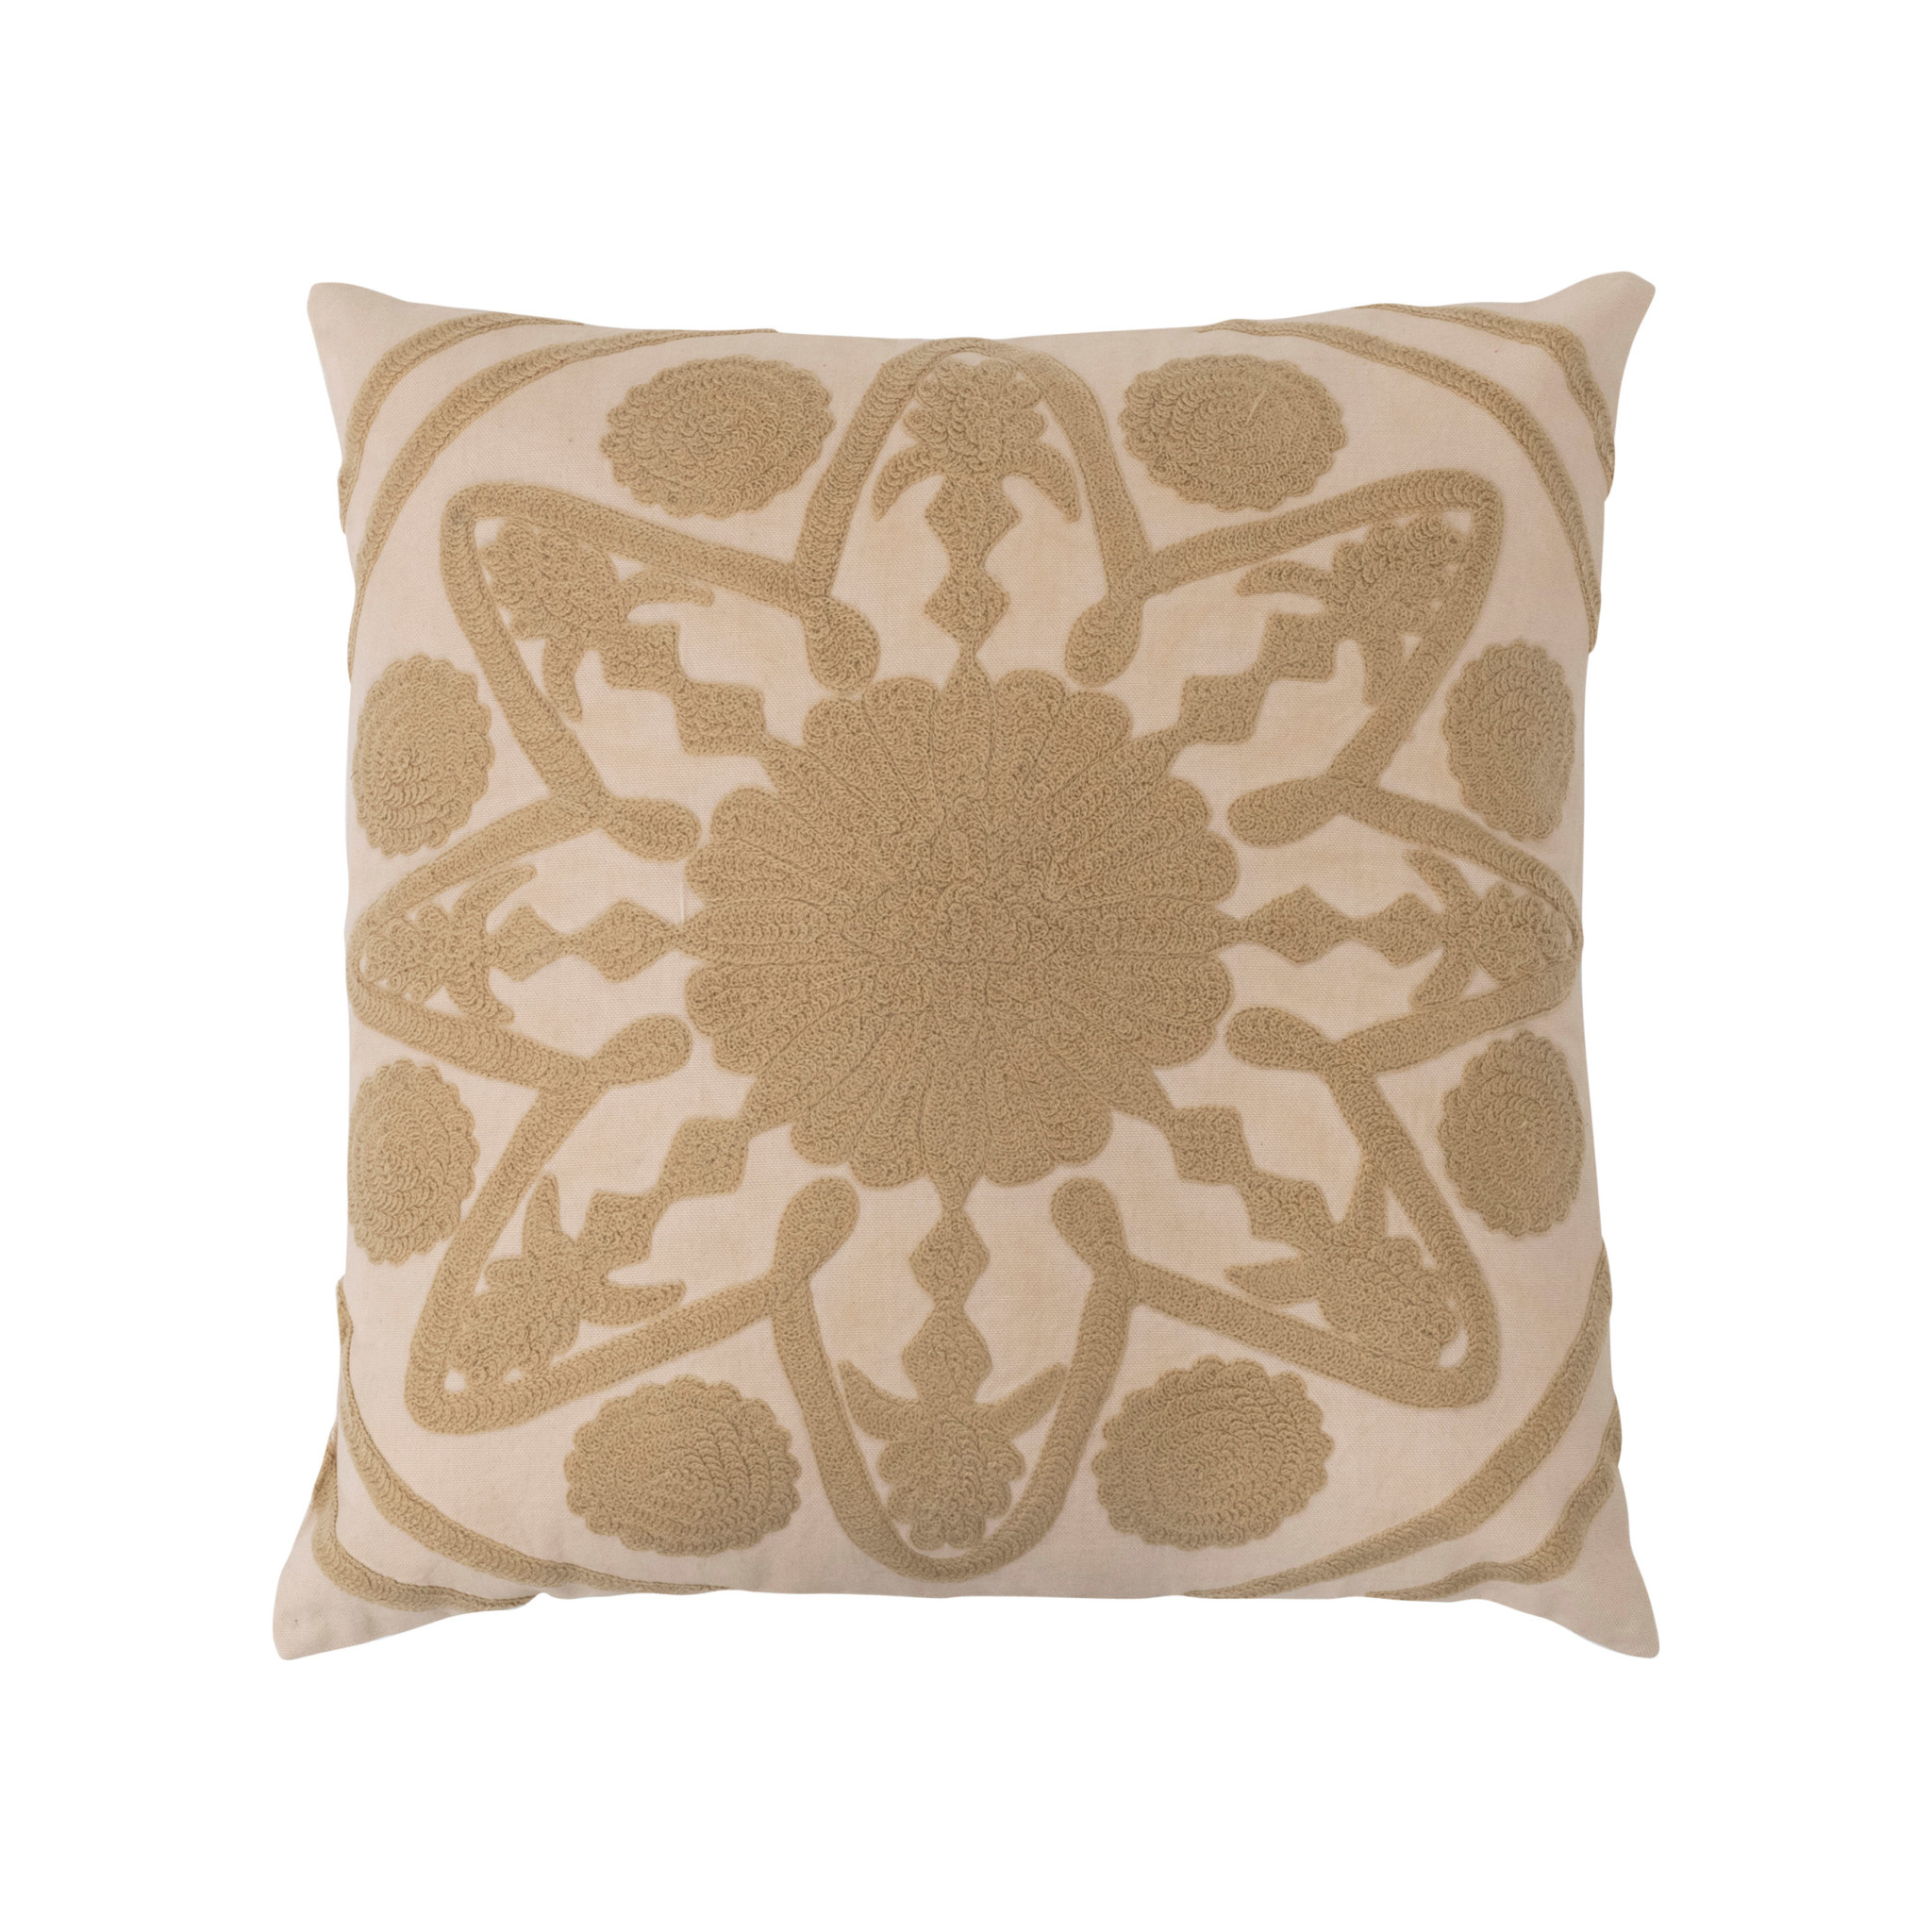 Neutral Embroidered Pillow